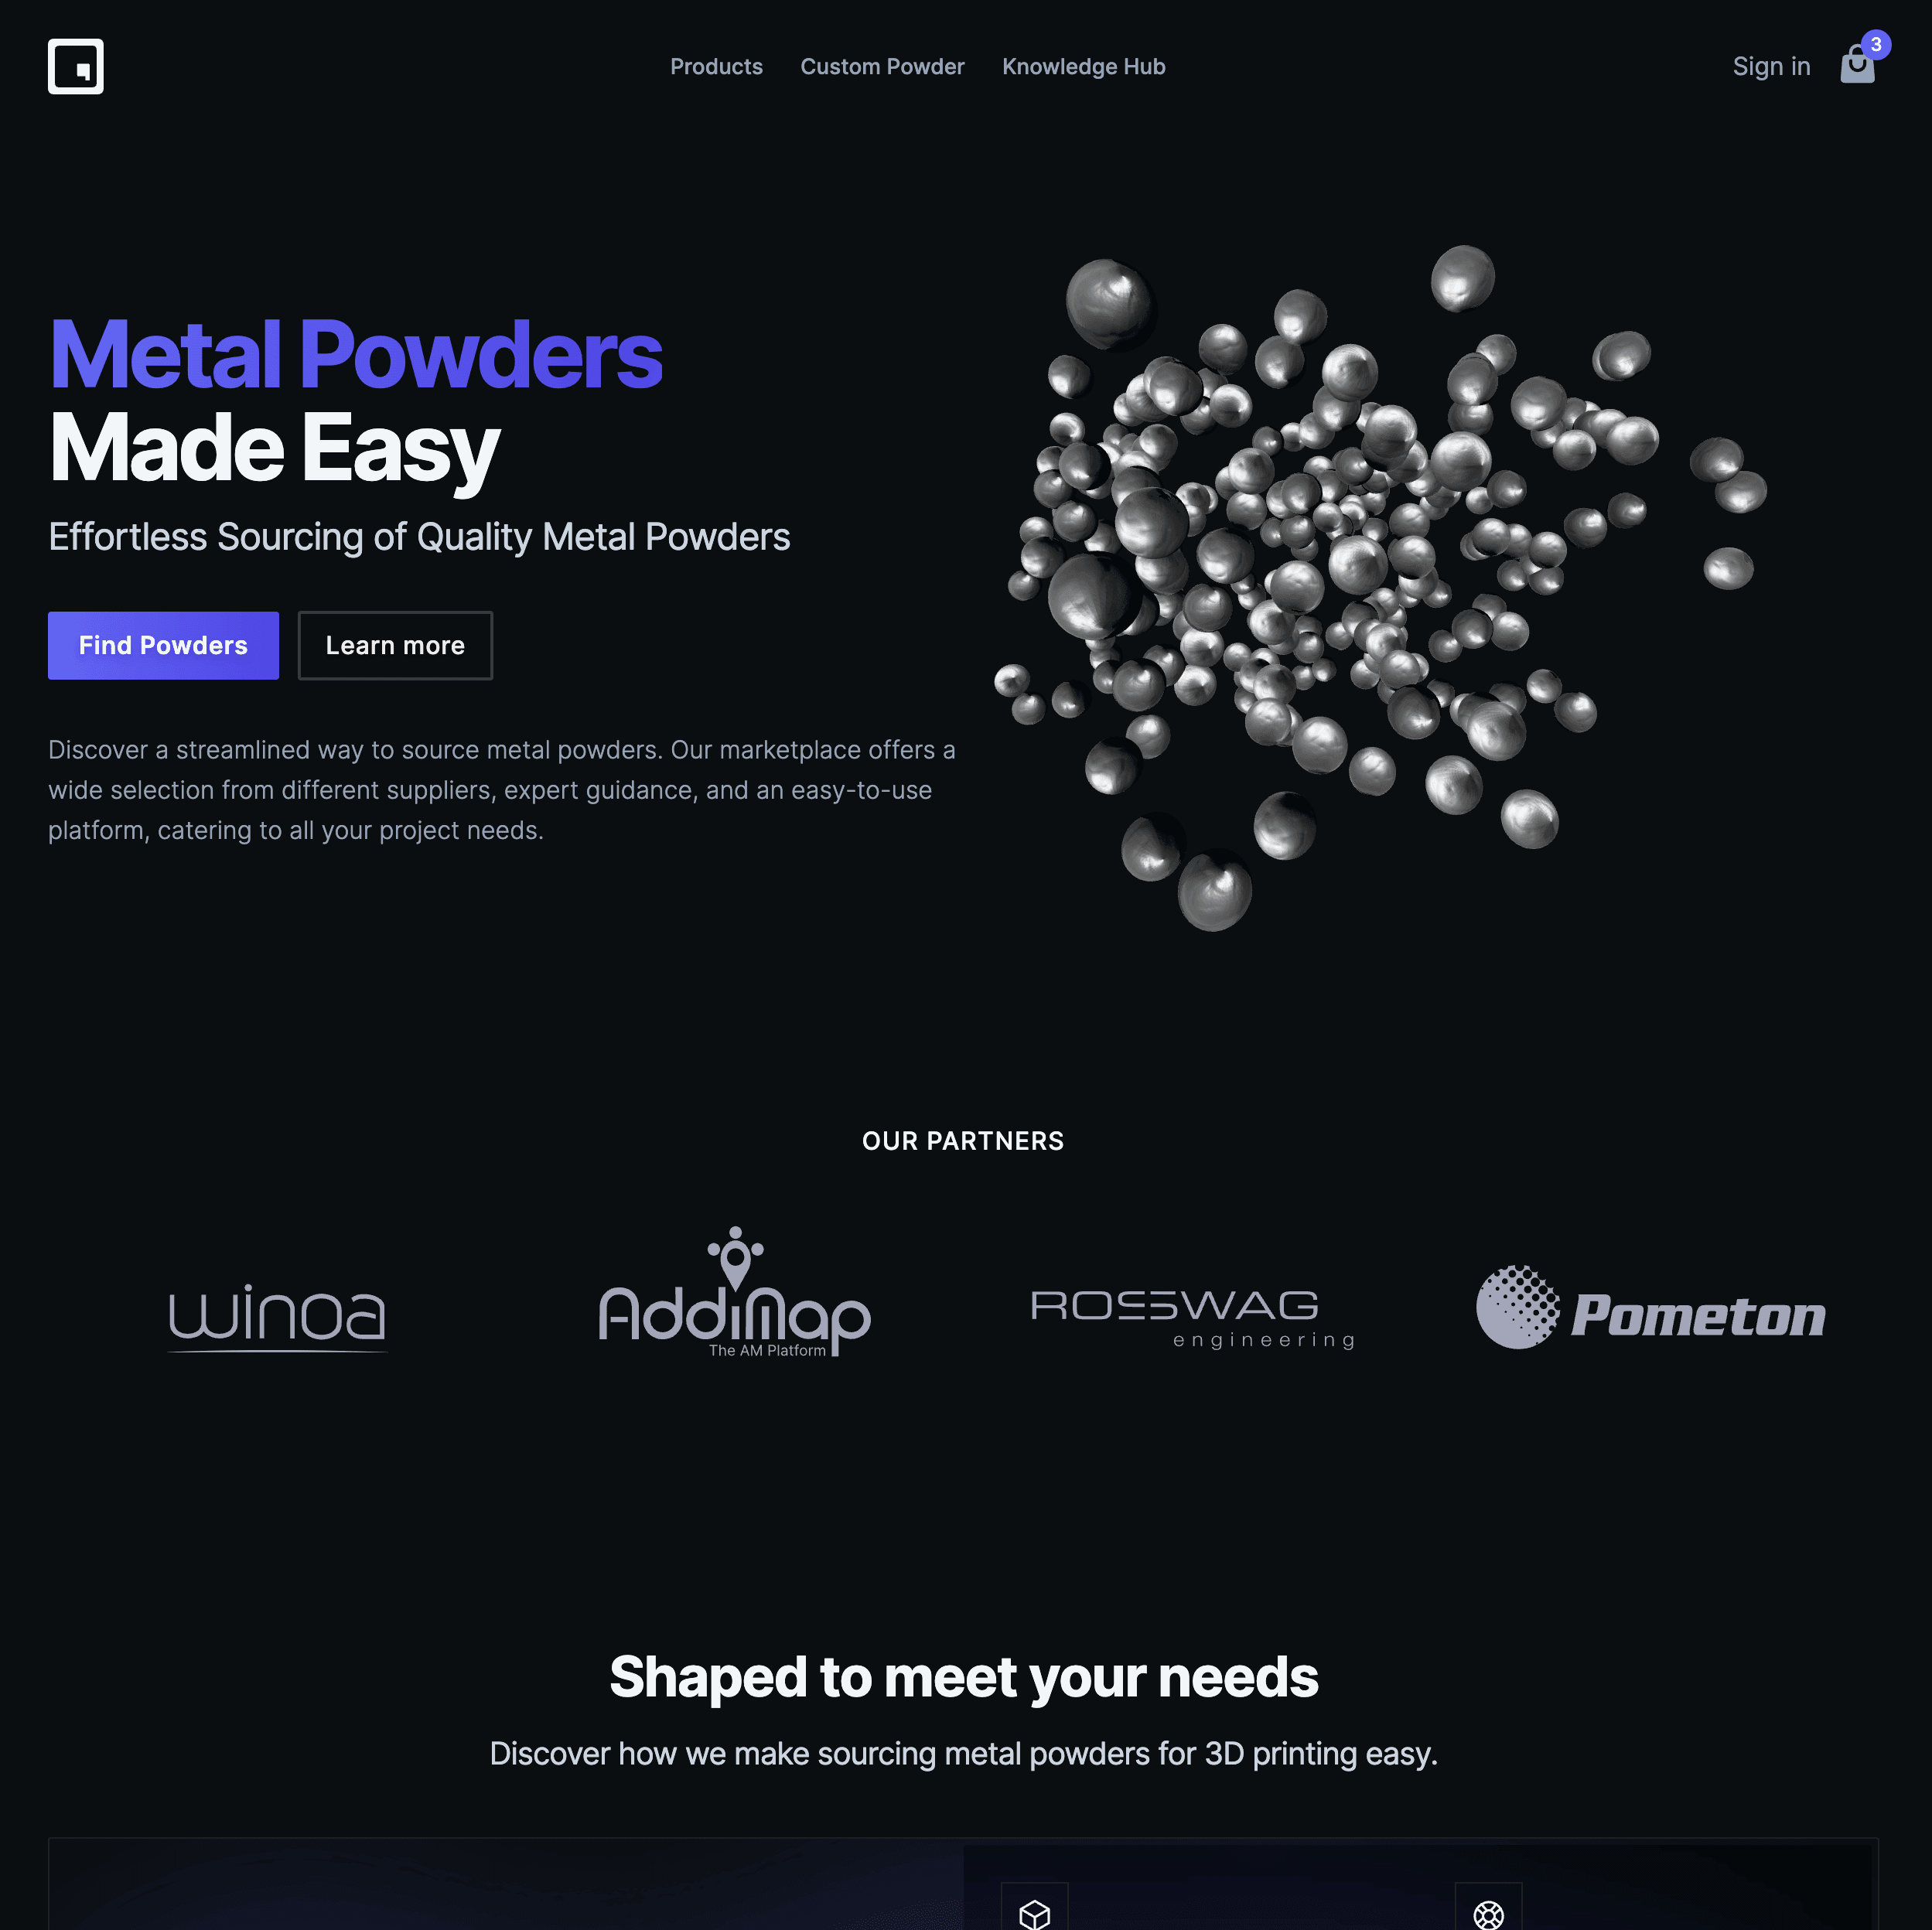 Introducing qualloy’s new marketplace